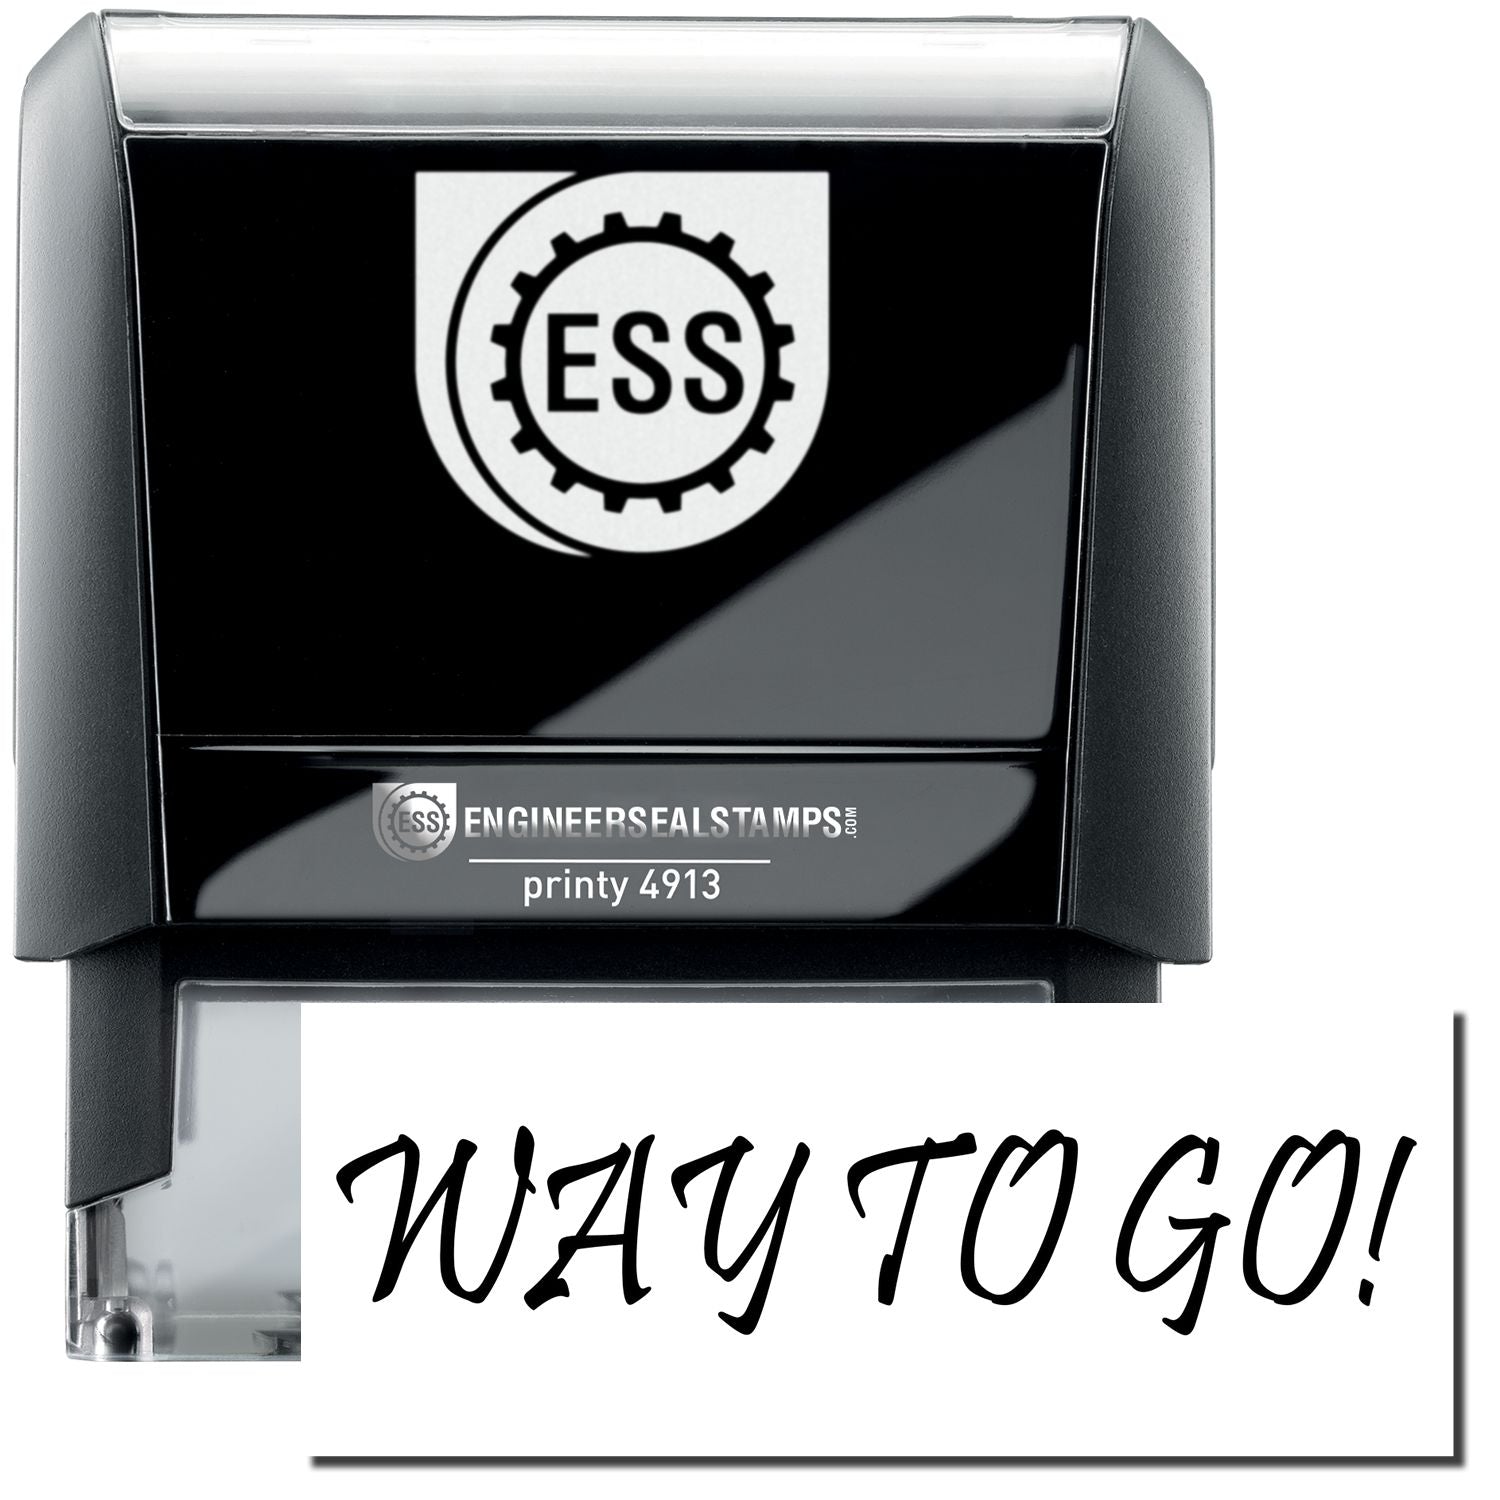 A self-inking stamp with a stamped image showing how the text "WAY TO GO!" in a unique large font is displayed by it.